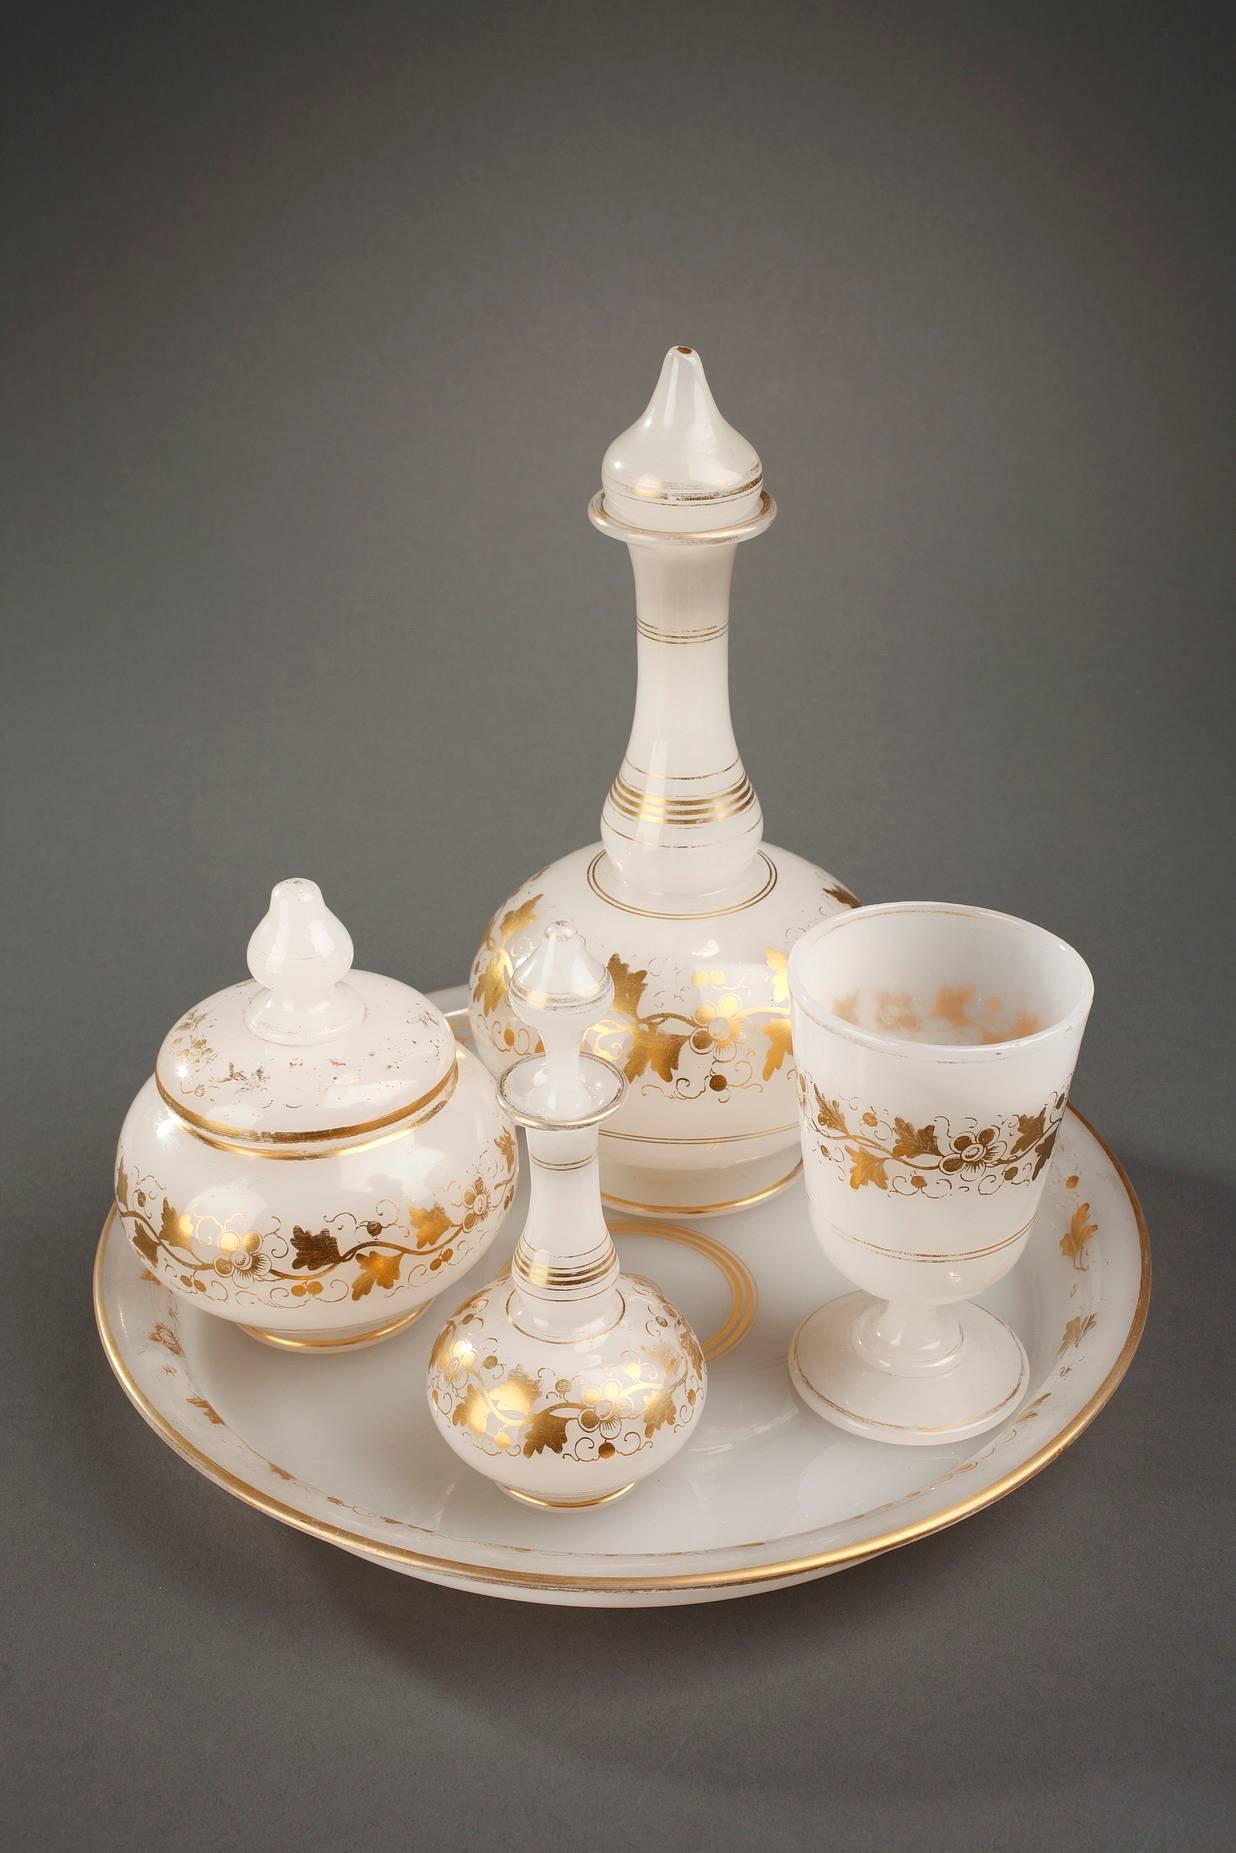 White opaline water set highlighted with golden stripes, garlands of plants, and small flowers. The set is composed of a round tray, a glass, a sugar bowl, a jug and a flask with their pointed stoppers. Beautiful quality of glass and delicately